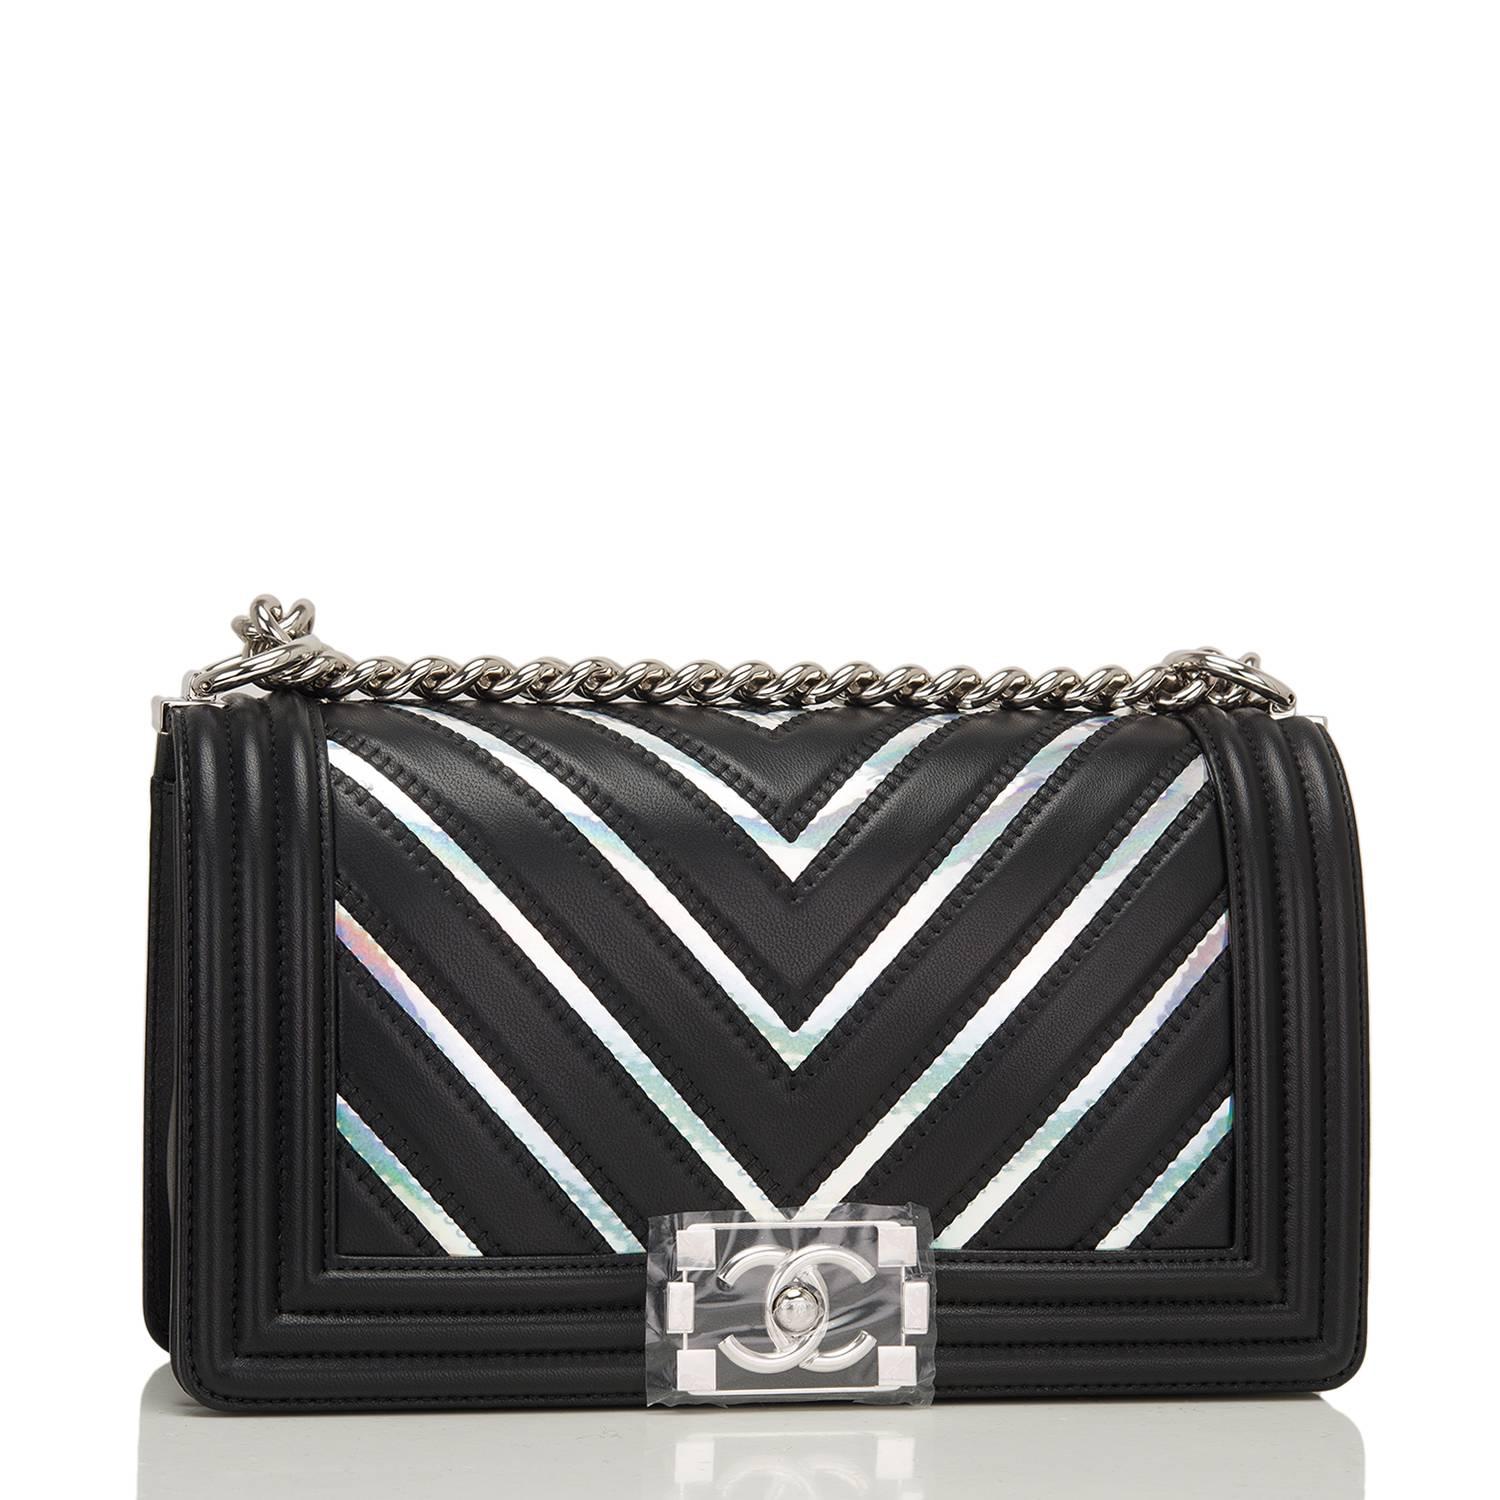 Chanel Old Medium Boy bag of black lambskin leather with multicolor iridescent PVC chevron pattern and silver tone hardware.

This limited edition Chanel bag is in the classic Boy style with unique multicolored iridescent panels front and back, a